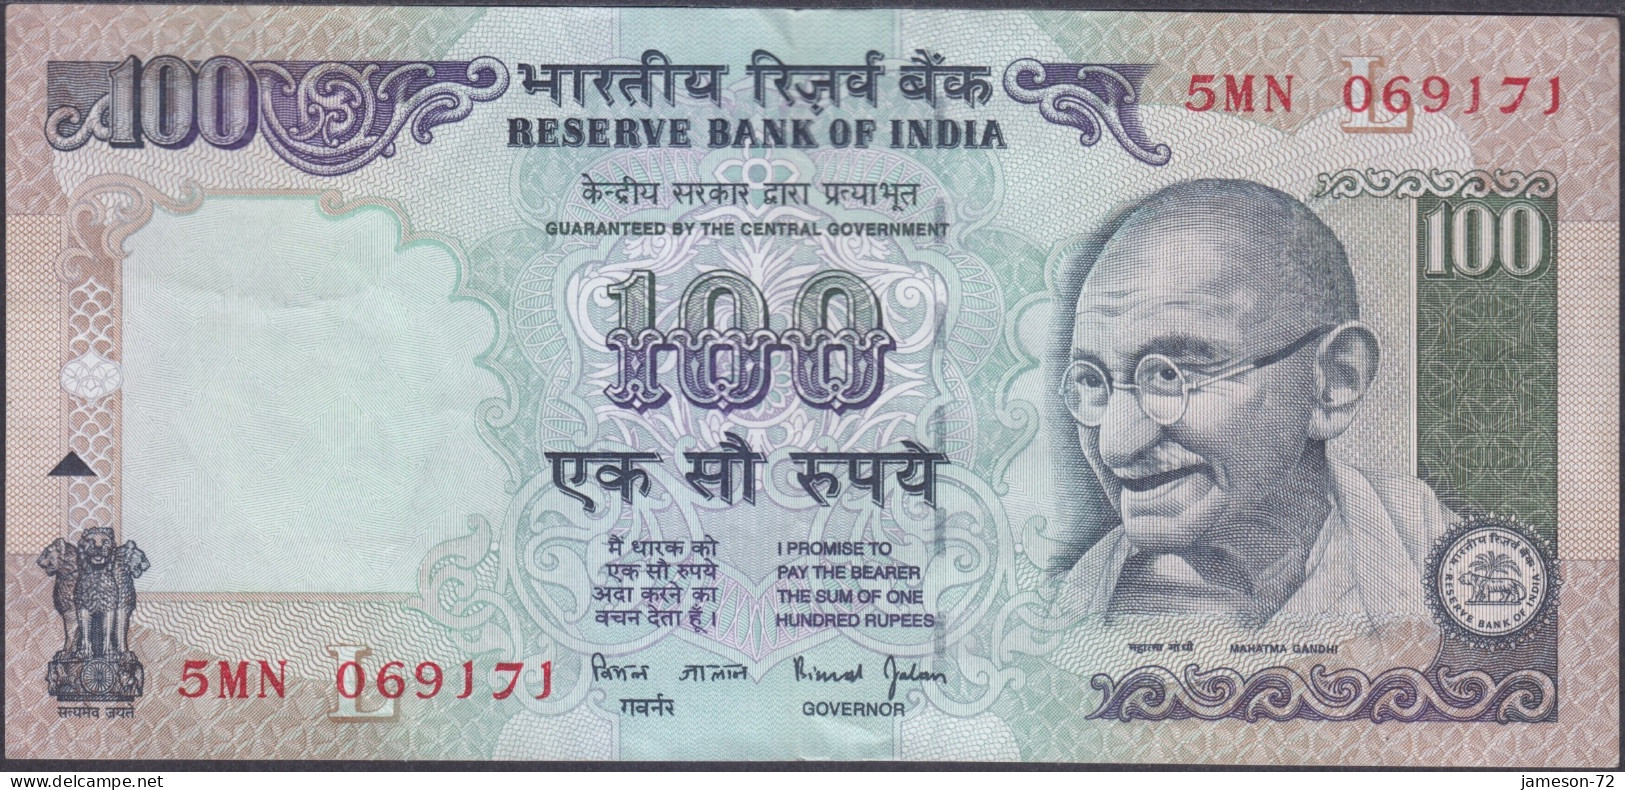 INDIA - 100 Rupees ND (1996) P# 91 Asia Banknote - Edelweiss Coins - Inde